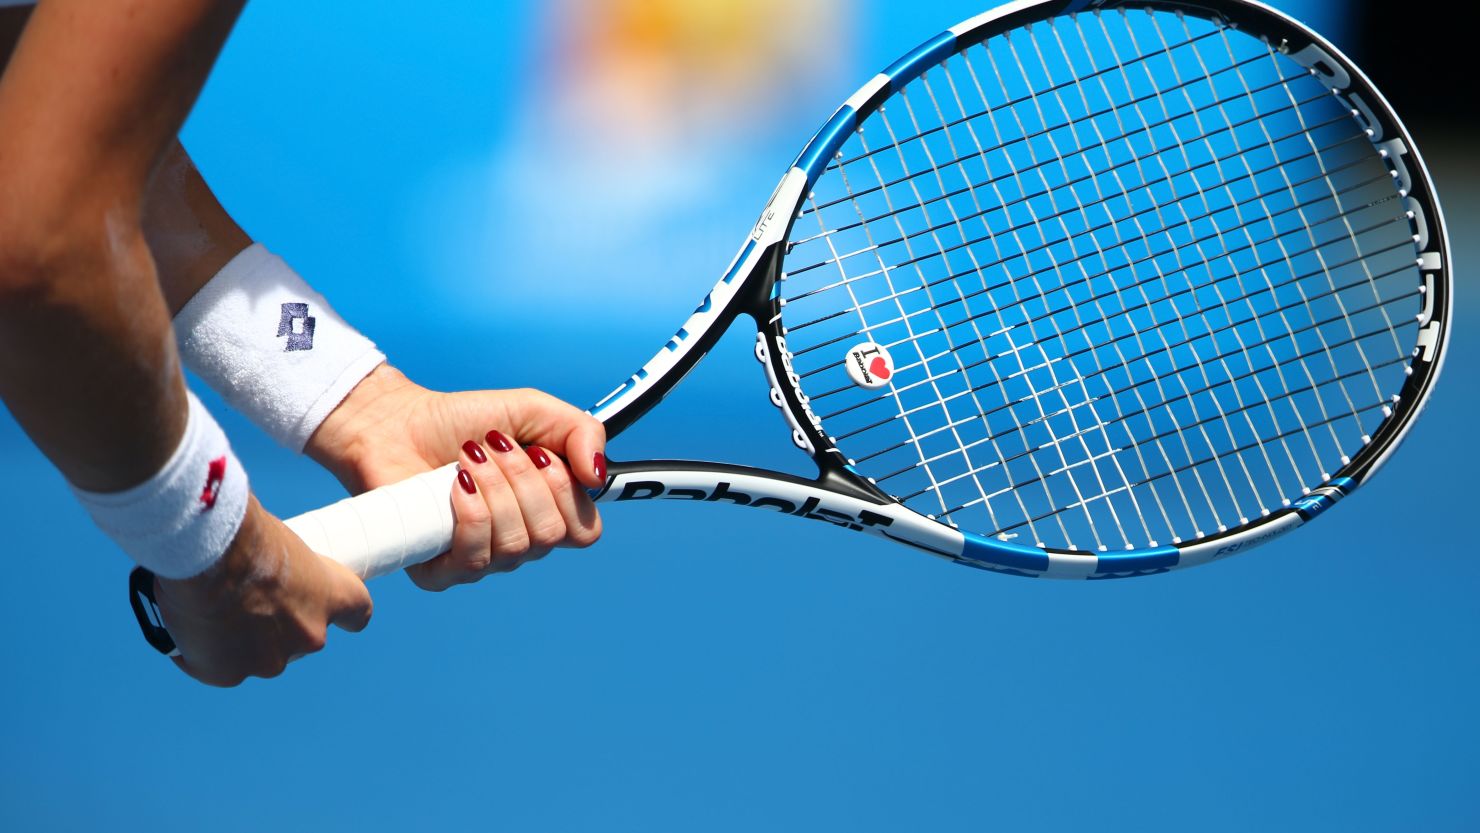 Tennis set up an independent review in the wake of match fixing allegations in the sport.